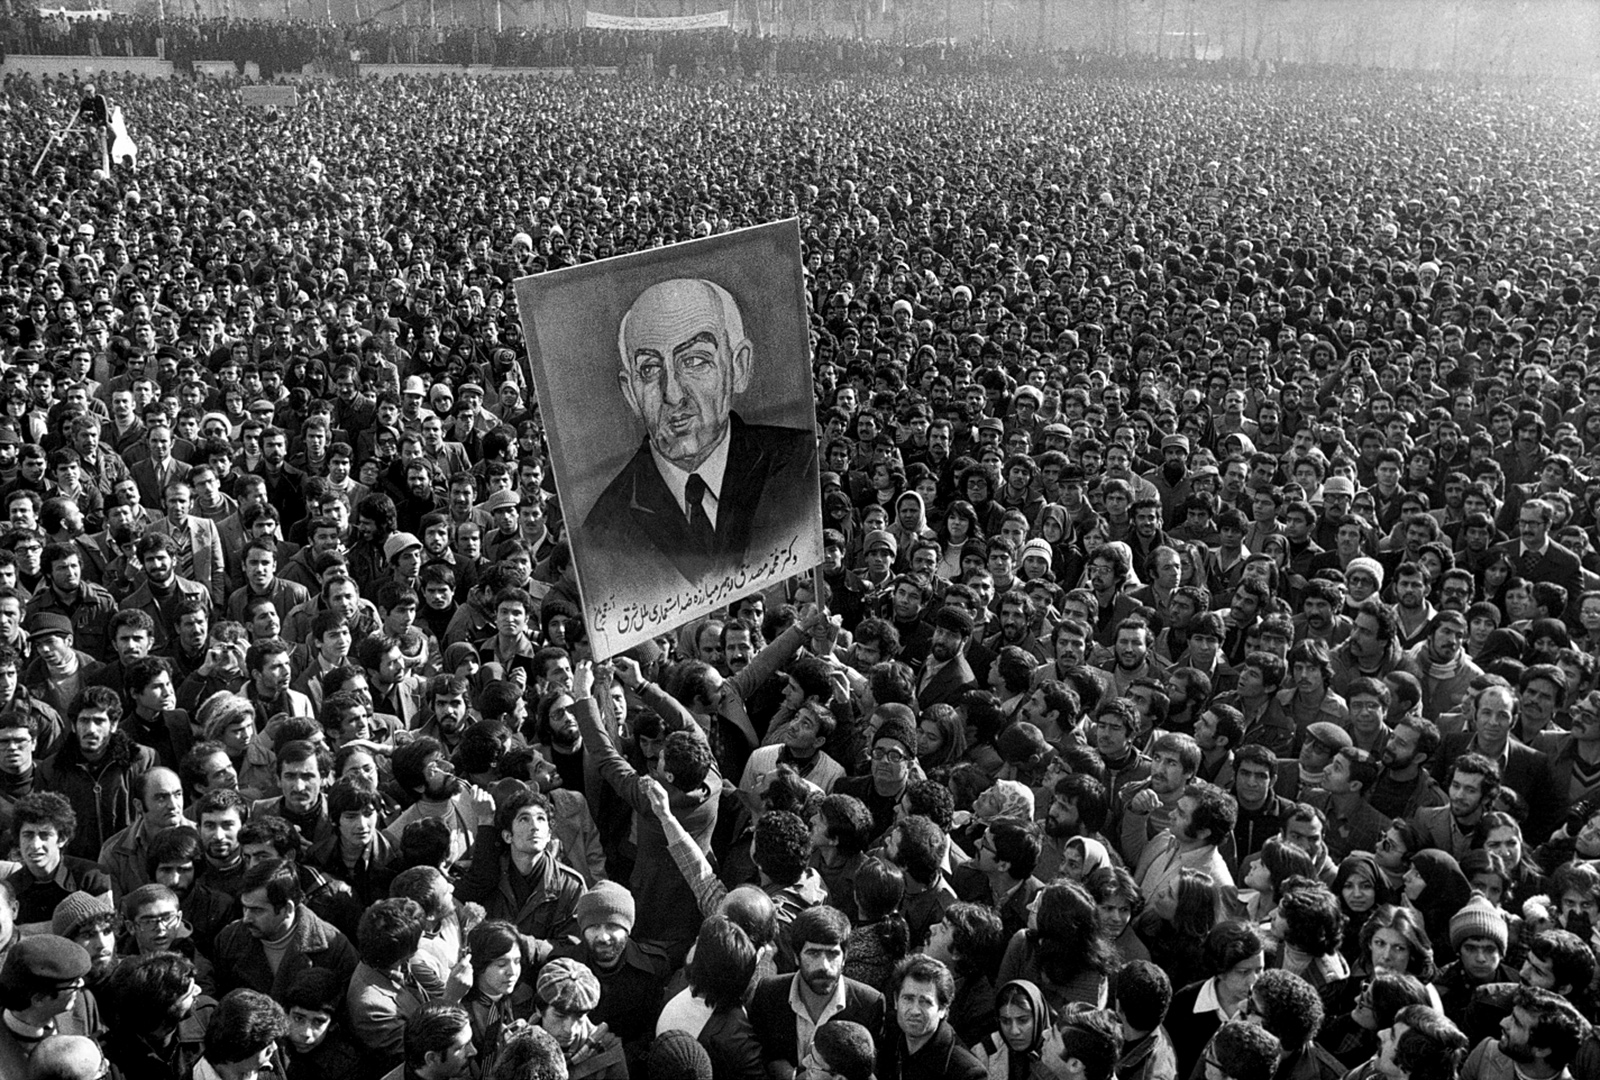 Protesters at Tehran University with a portrait of Mohammad Mossadegh during the Iranian Revolution, January 1979